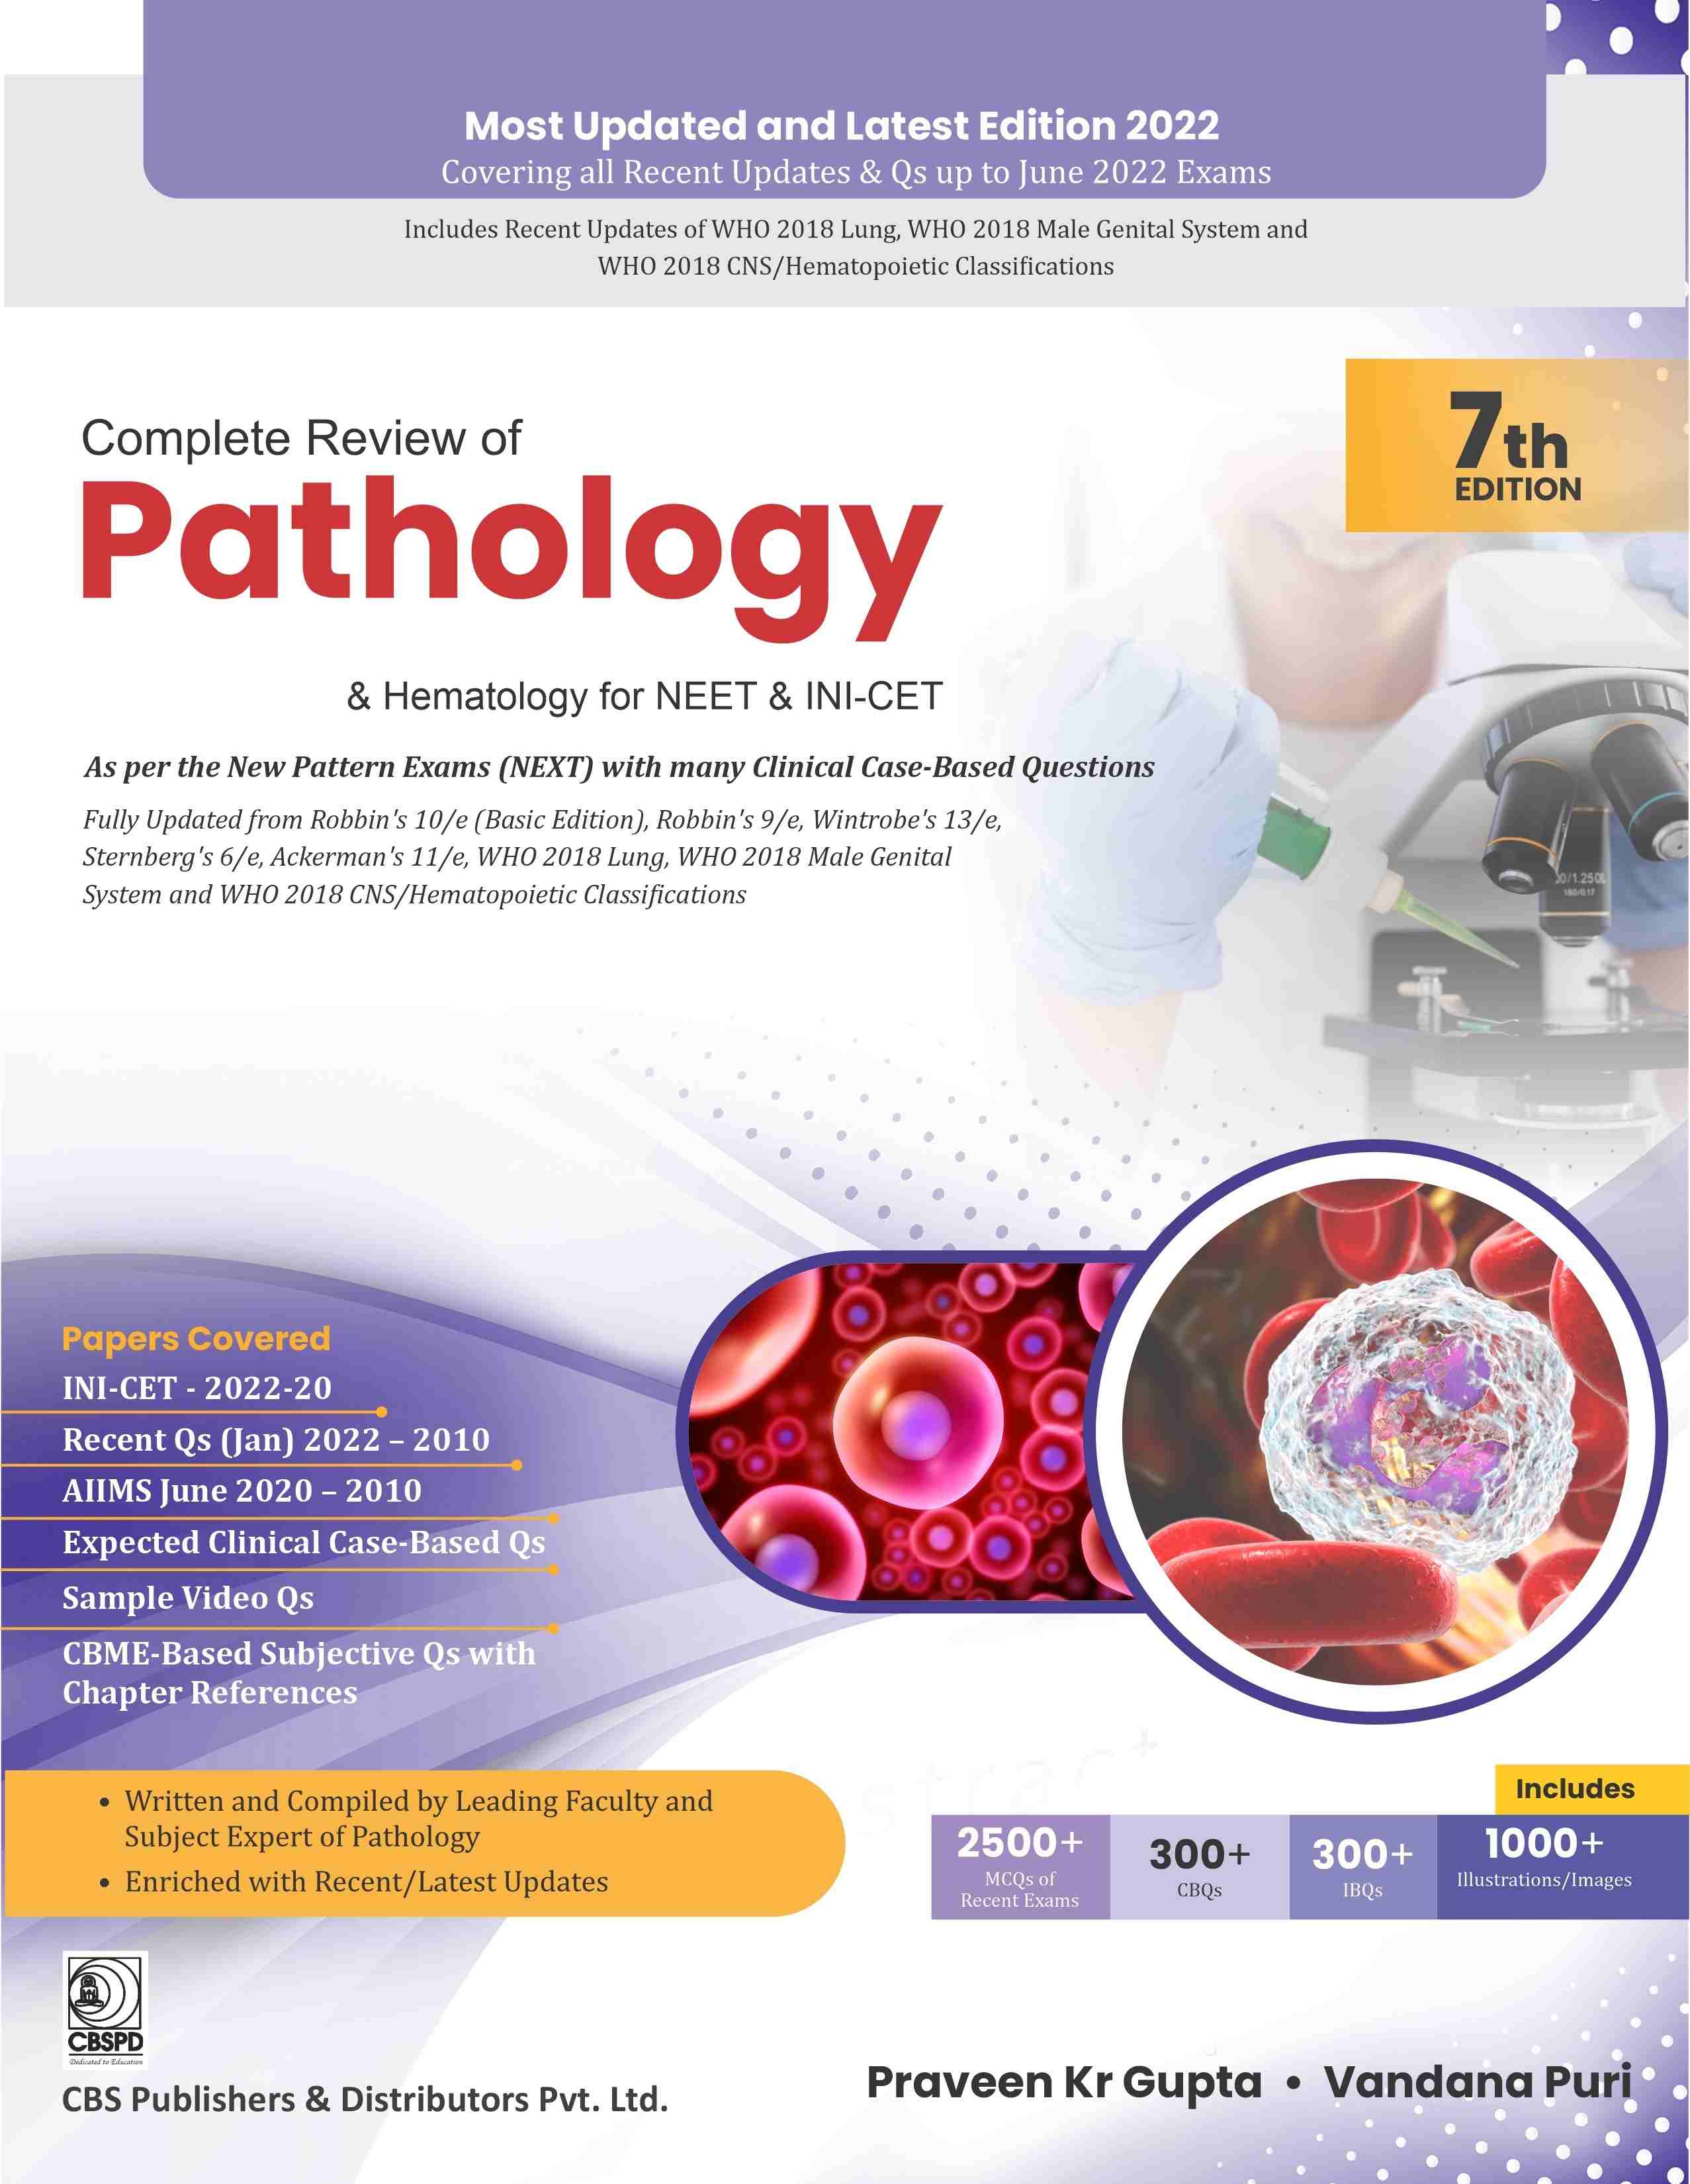 

best-sellers/cbs/complete-review-of-pathology-and-hematology-for-neet-and-ini-cet-7ed-pb-2022--9789390619009